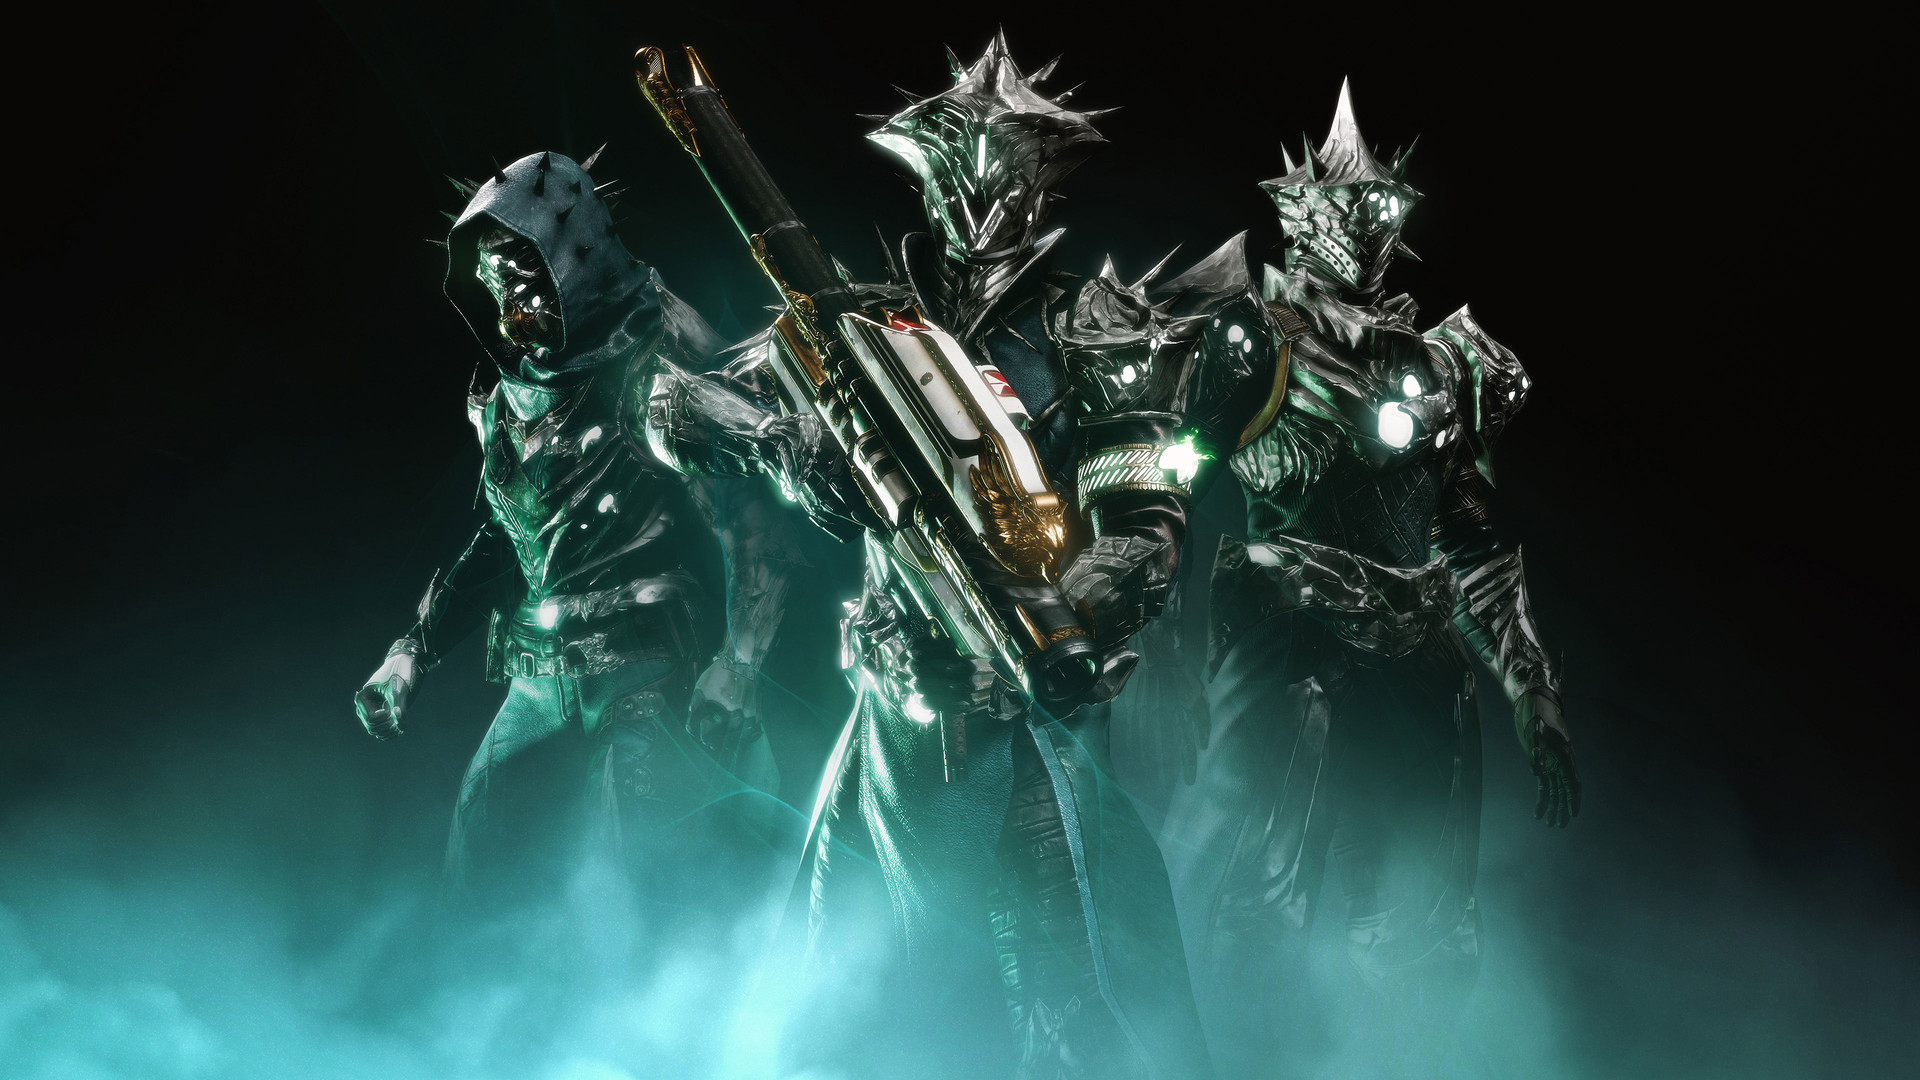 Gjallarhorn and the Thorn armour set, due in the 30th Anniversary Pack dungeon.